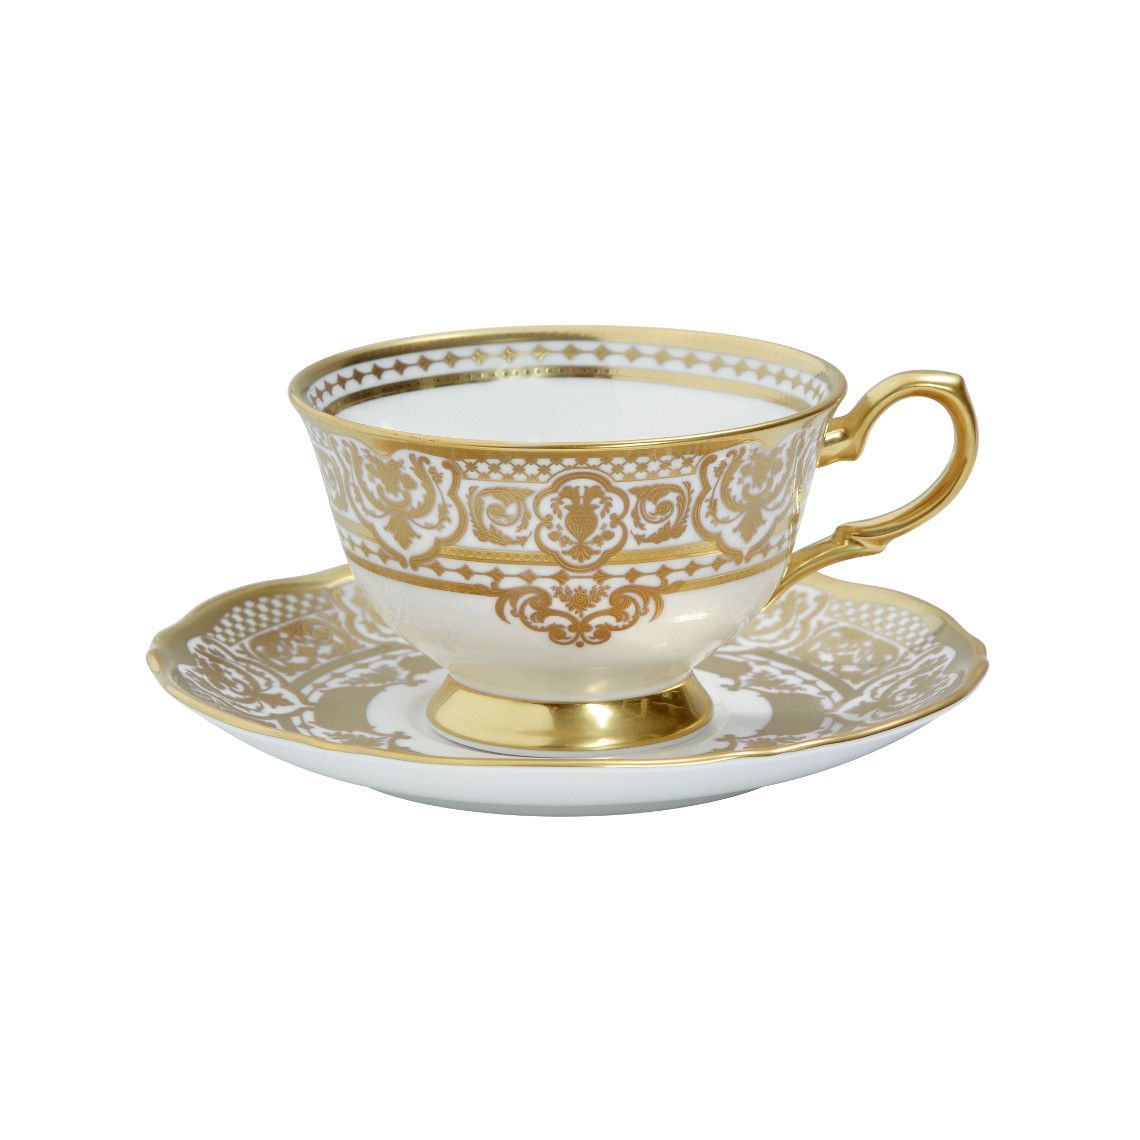 Prouna Carlsbad Queen White Tea Cup & Saucer White Background Photo